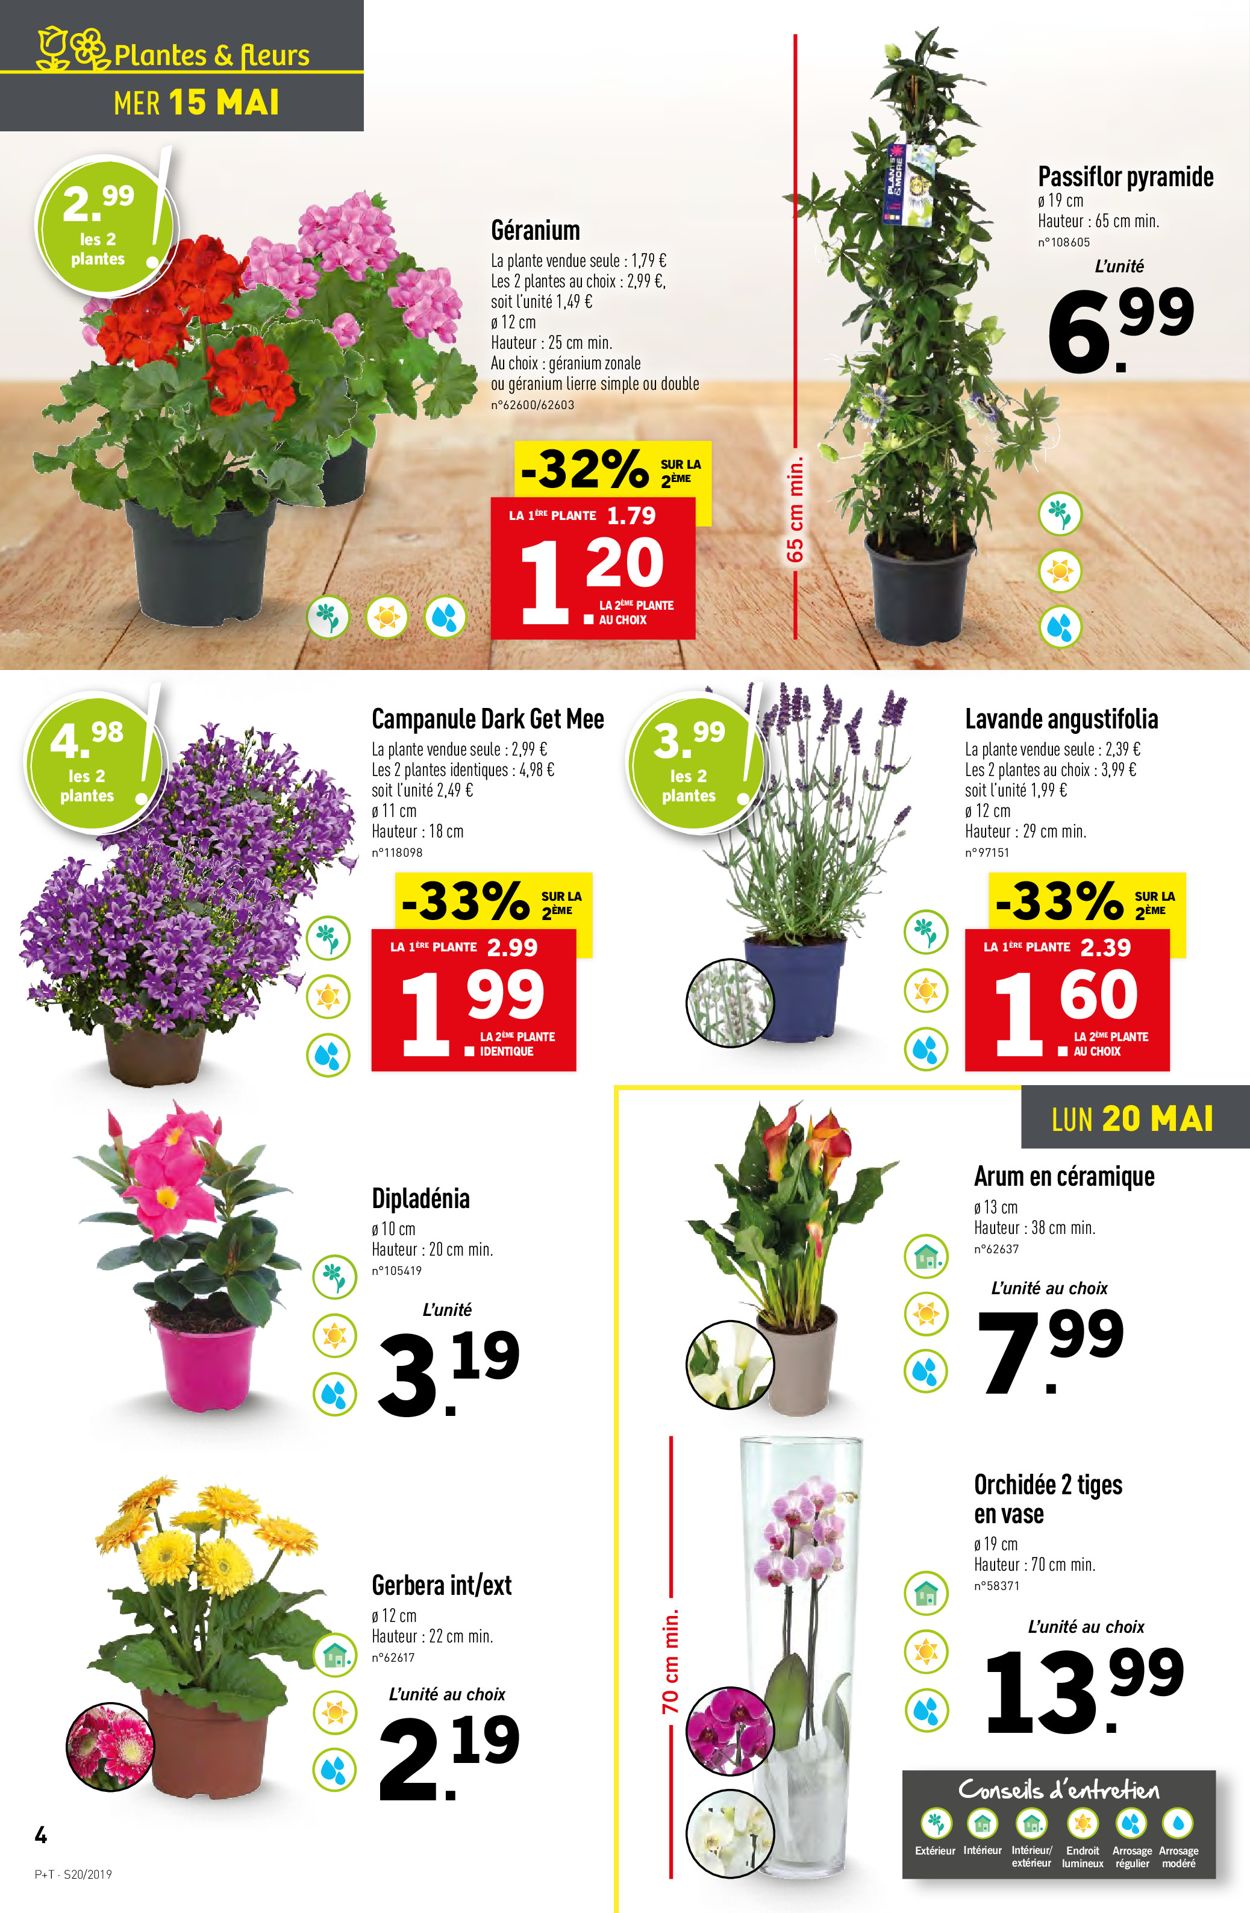 Lidl Catalogue - 15.05-21.05.2019 (Page 4)